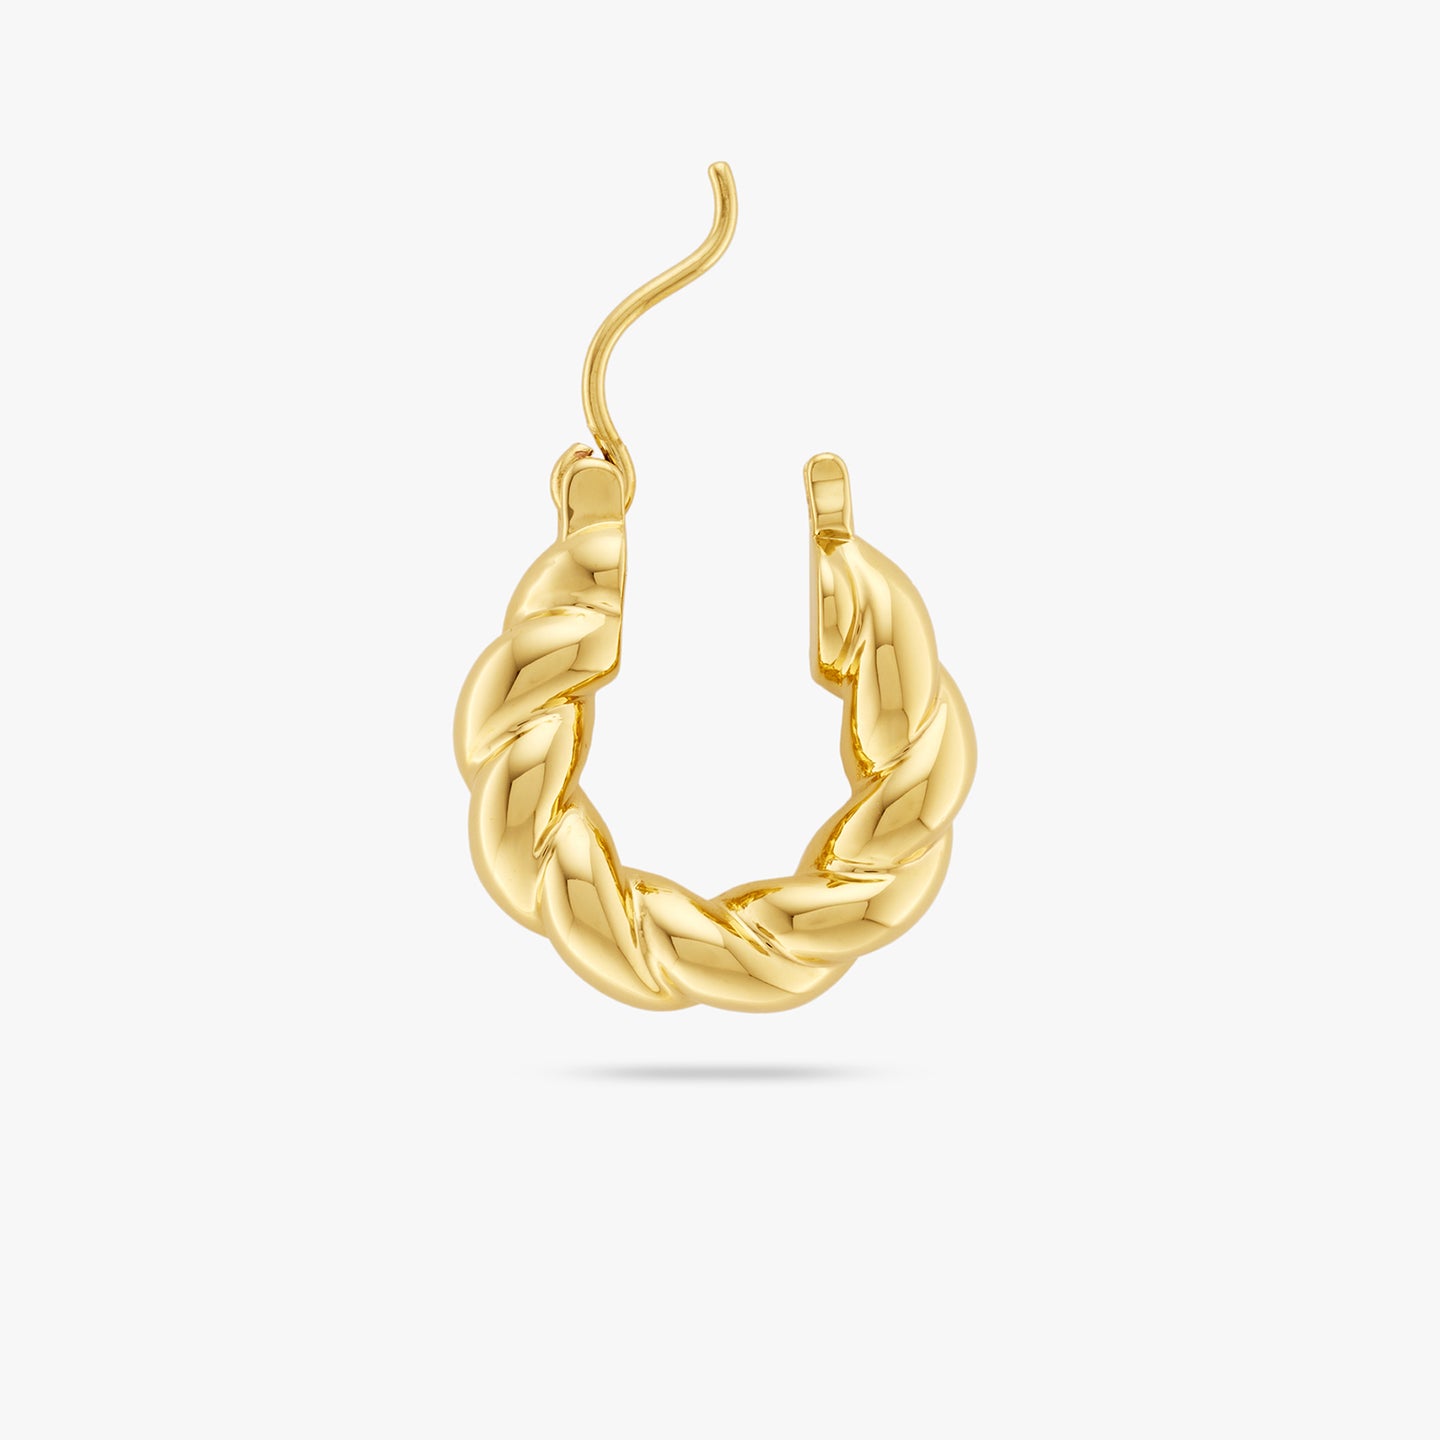 This is a small gold hoop with a twisted detail and the clasp opened color:null|gold